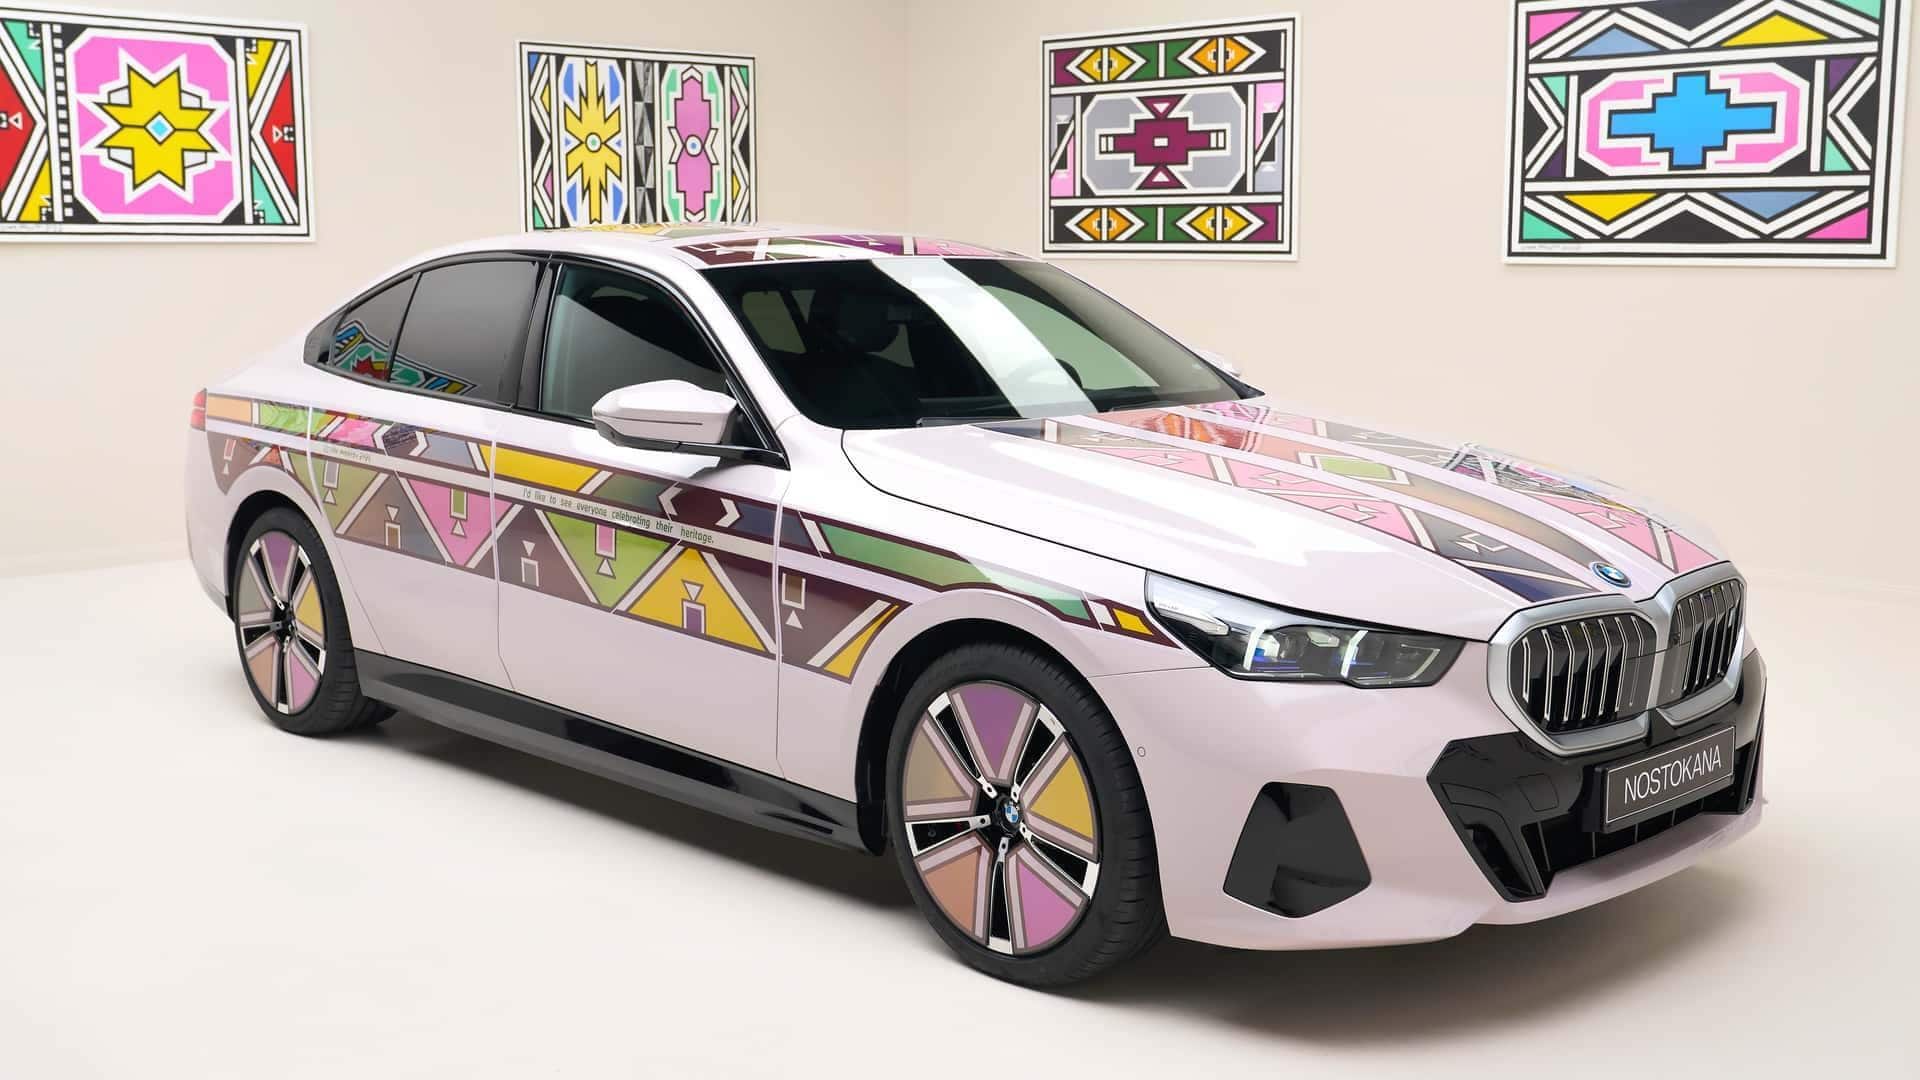 This BMW EV has color changing body: How it works